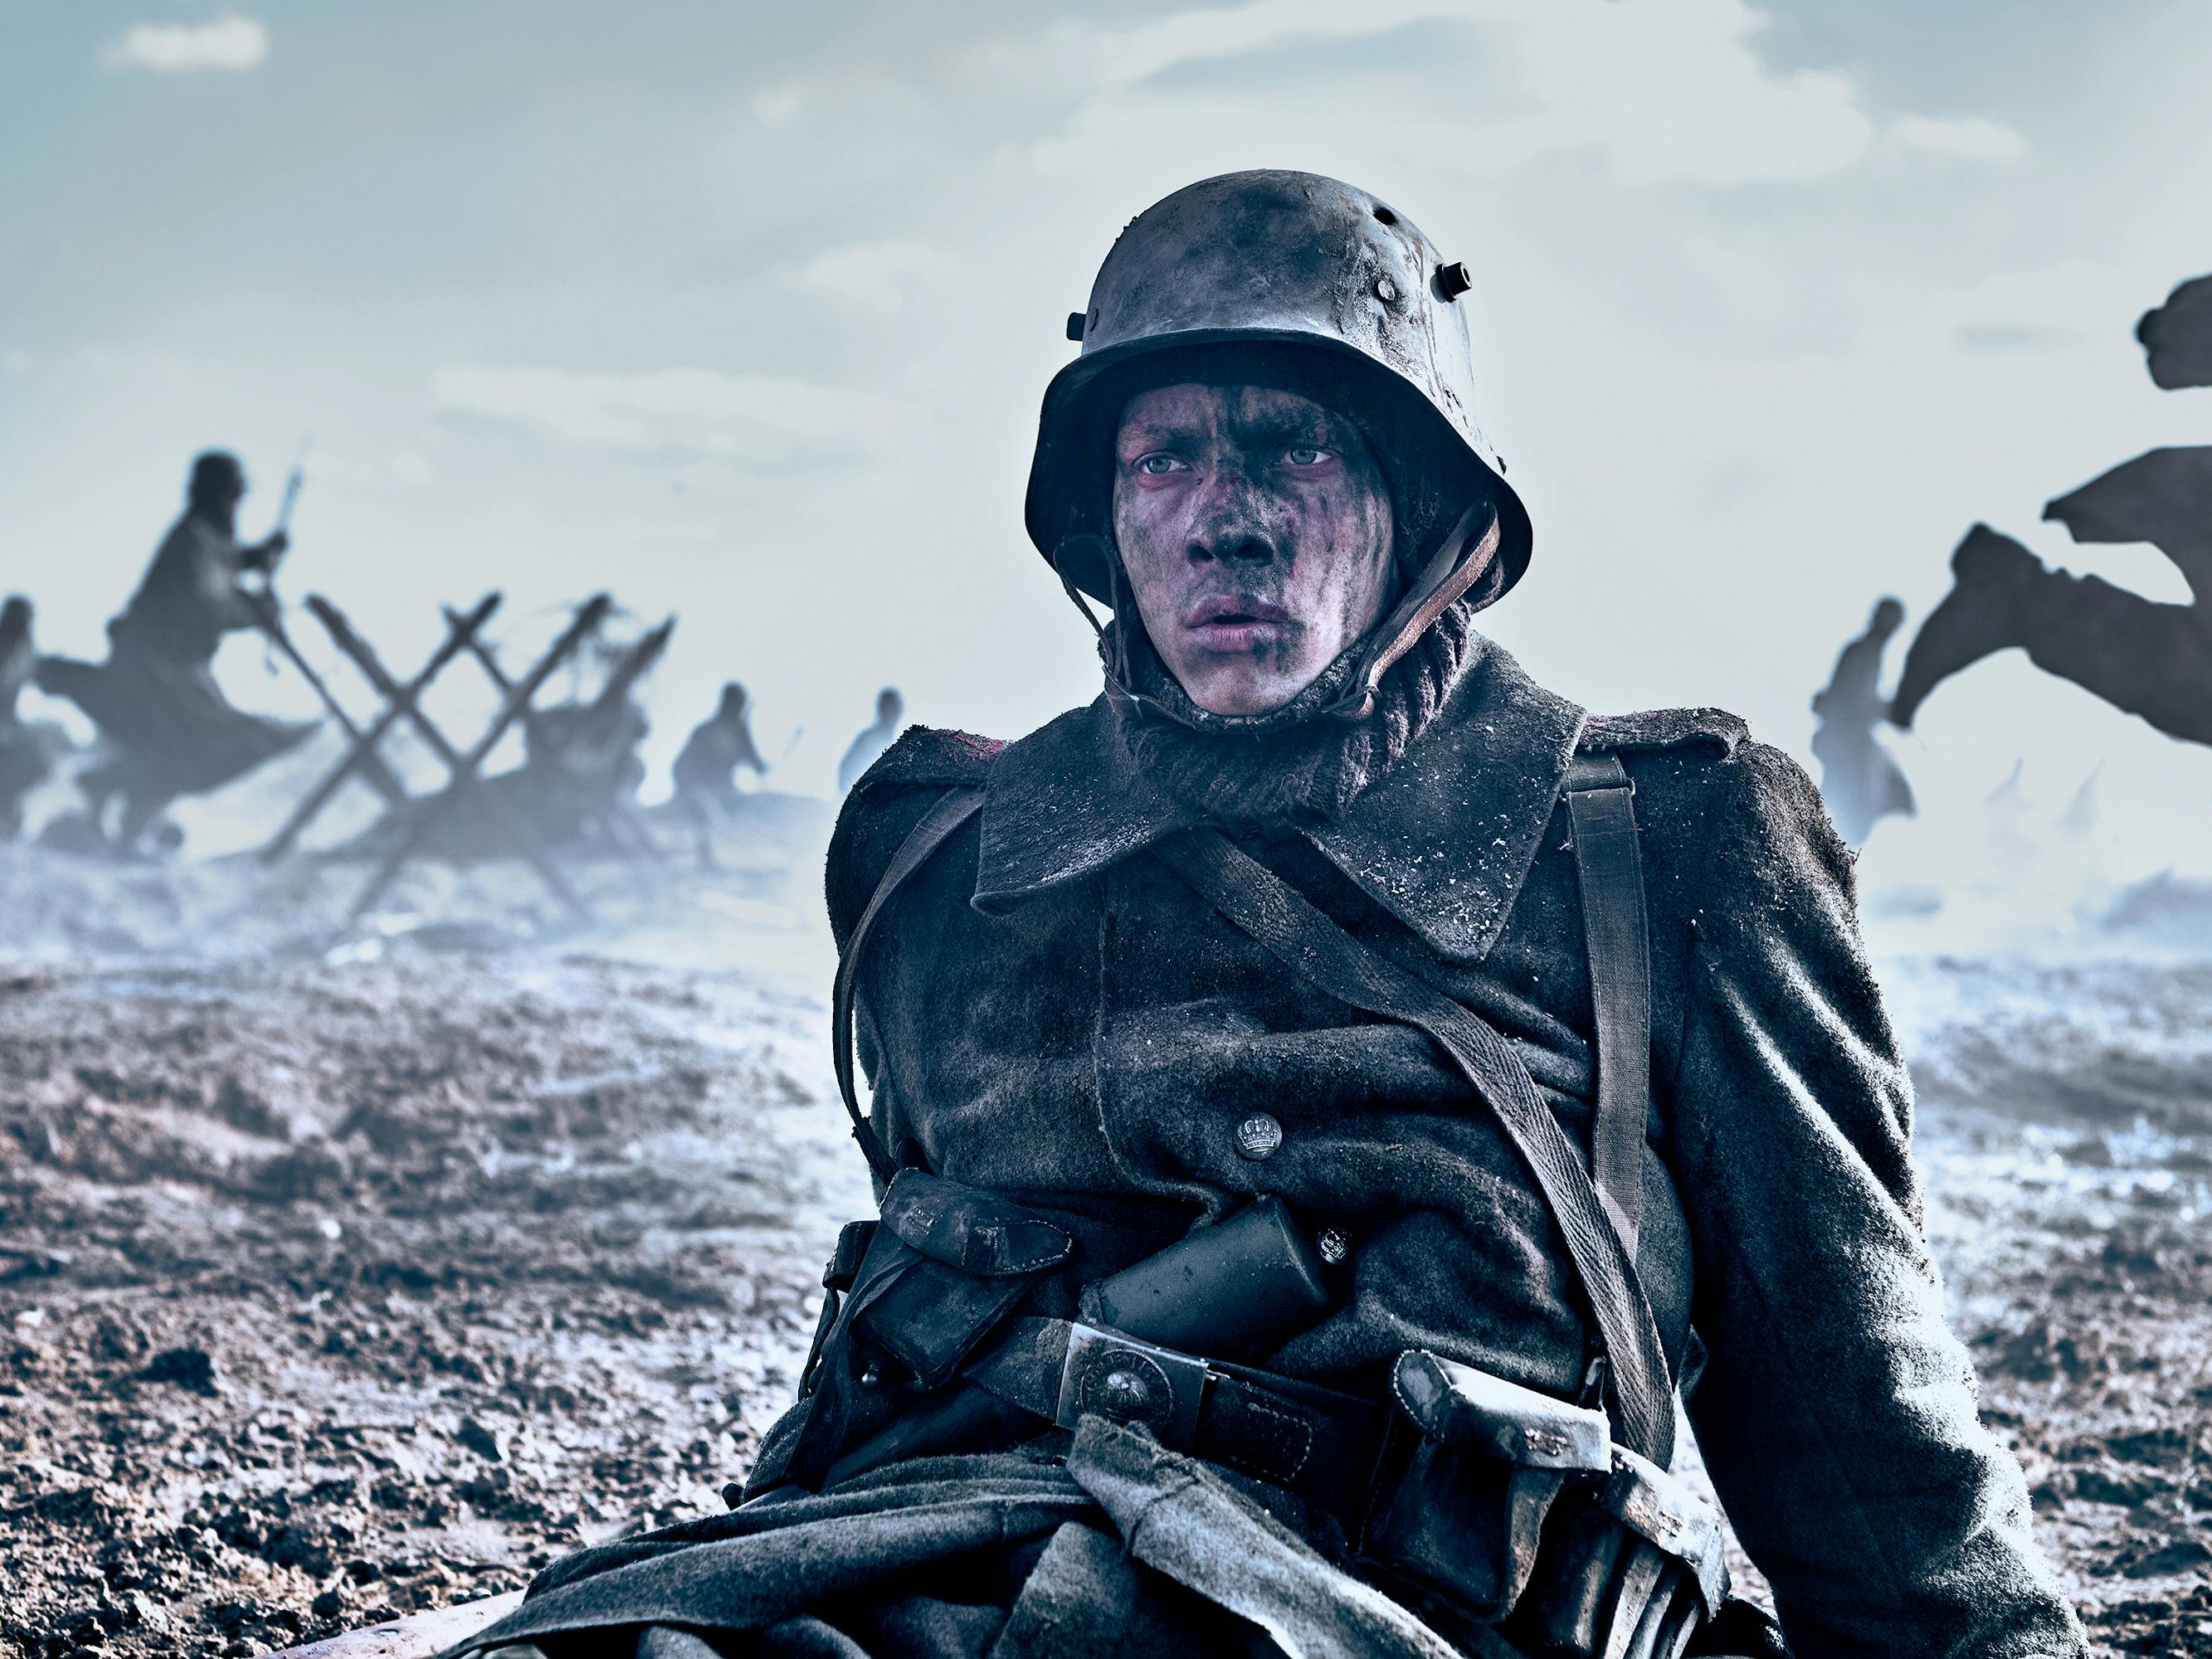  Paul Bäumer (Felix Kammerer) sits in the middle of a battlefield in full get up, covered in mud.